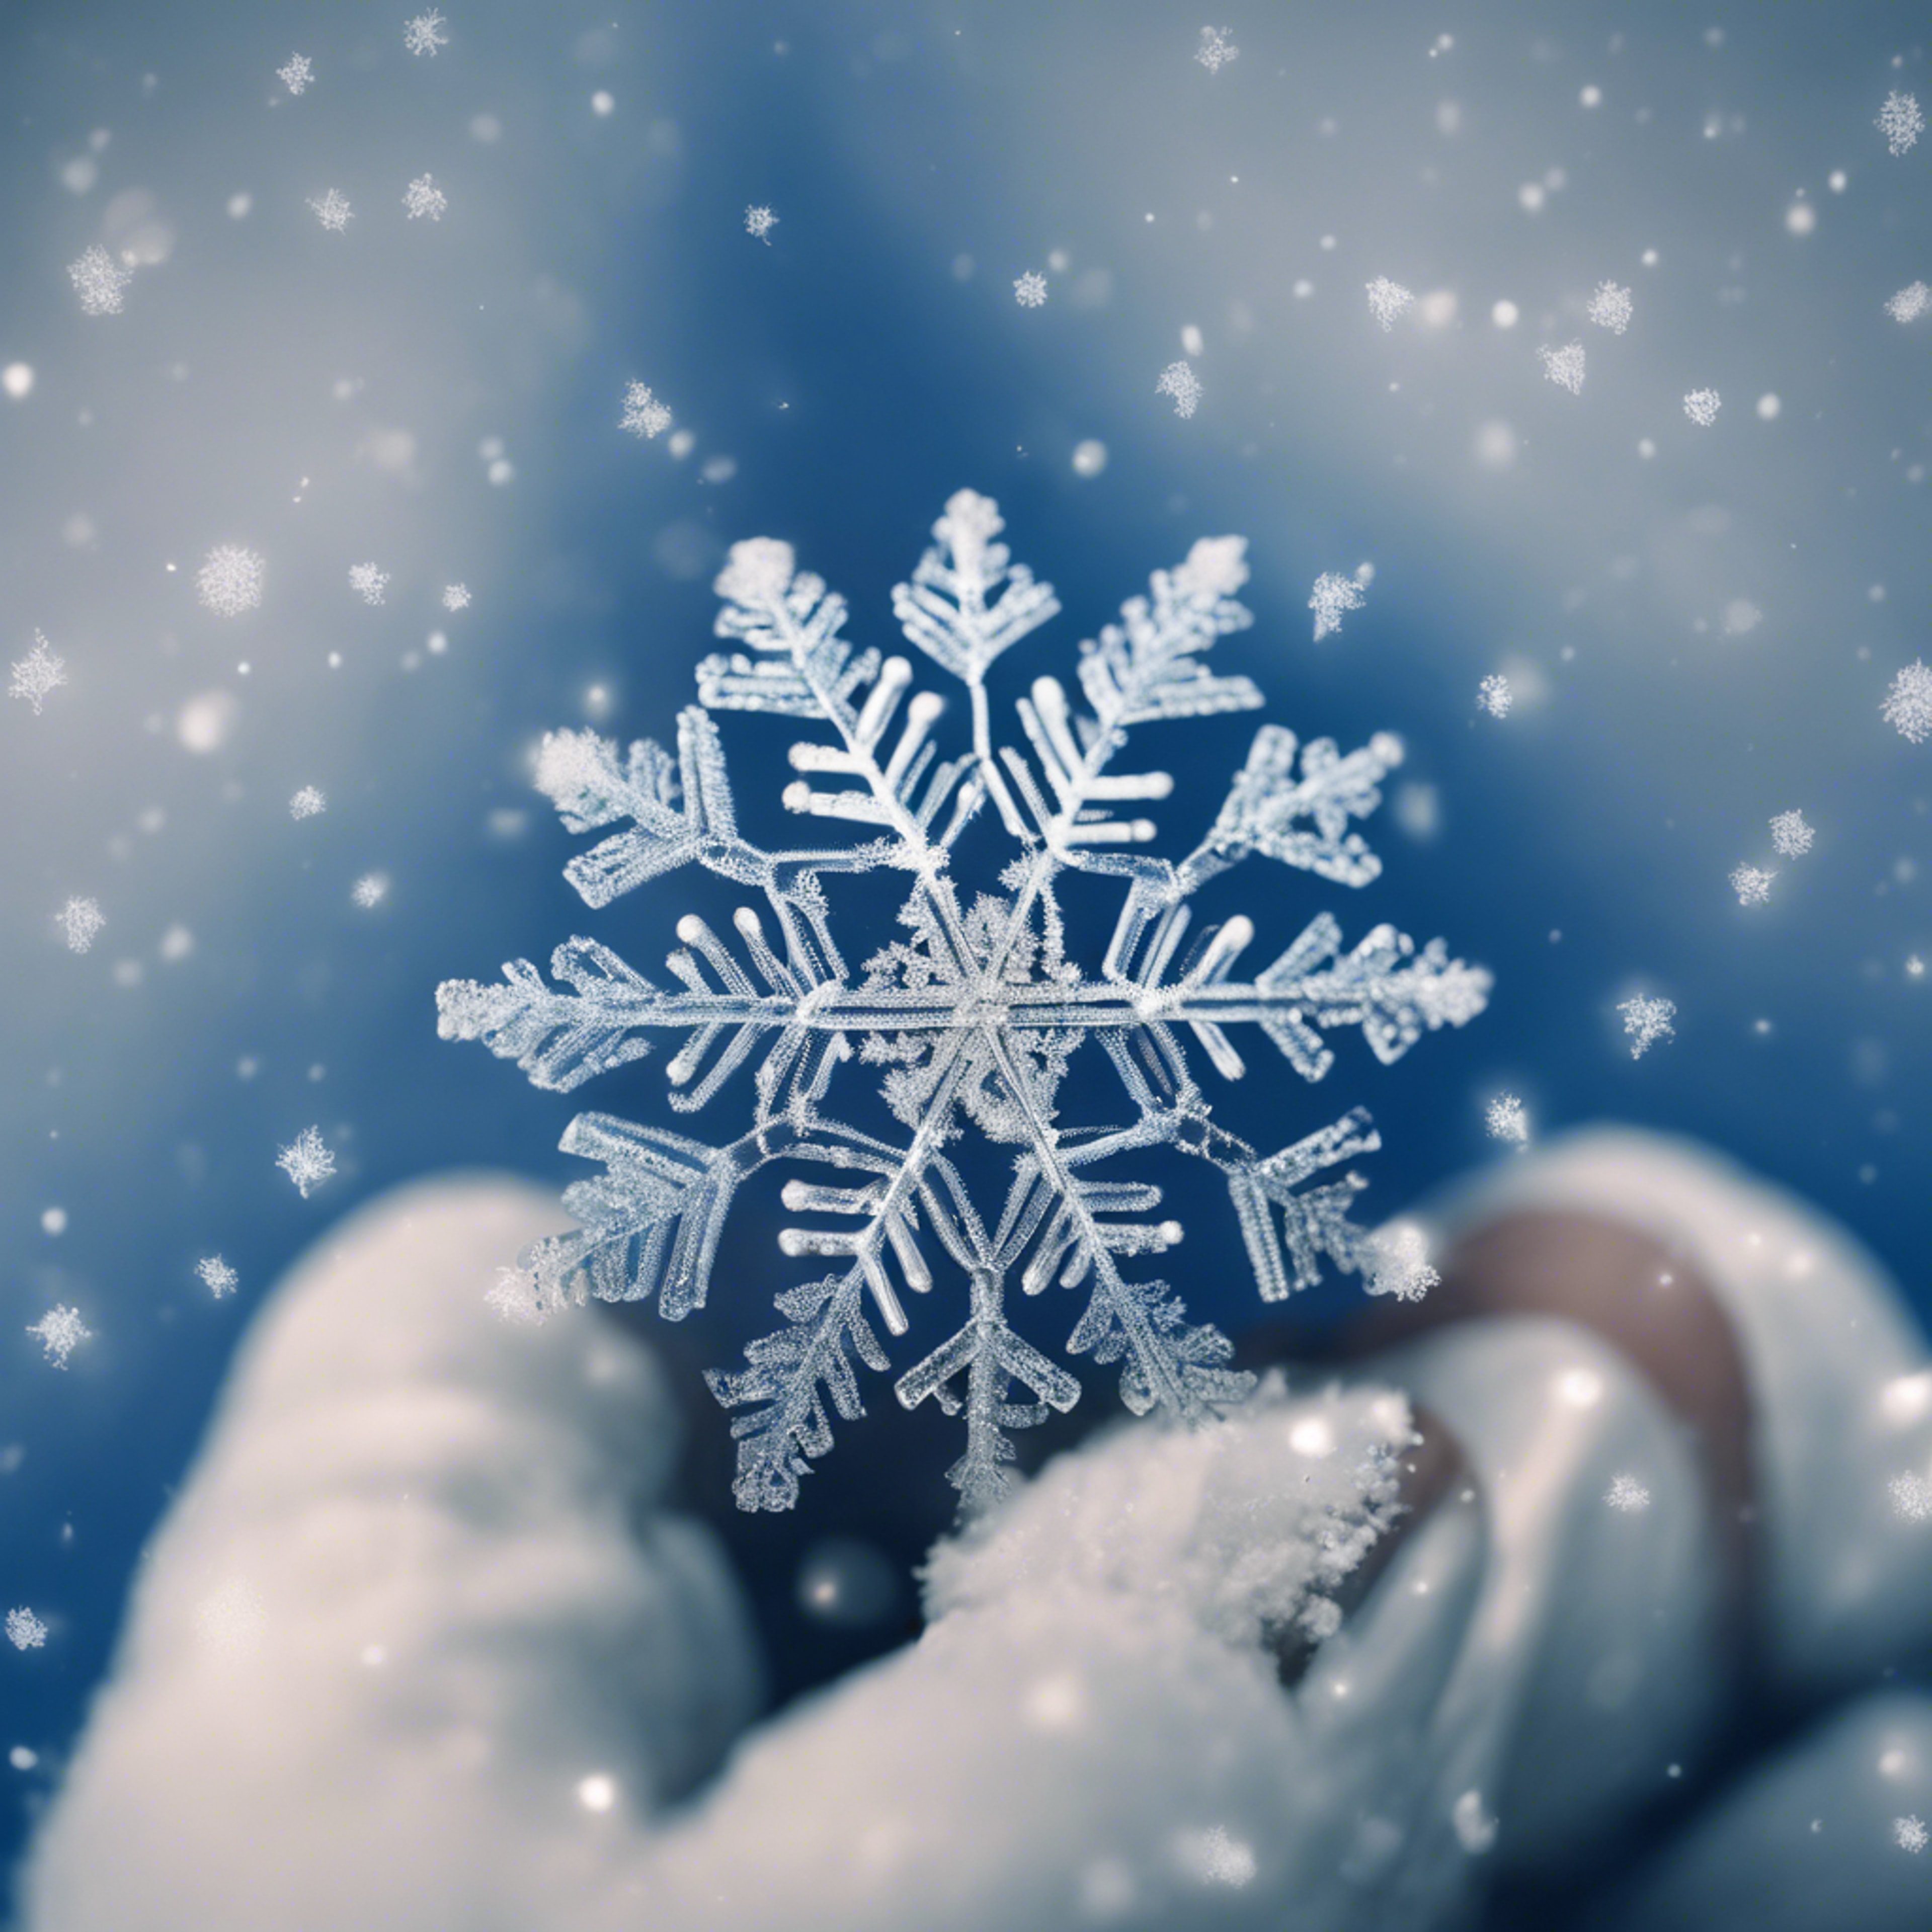 Intricate patterns of a snowflake on a blue gloved finger. Тапет[6c7ed0f3c74b413e9833]